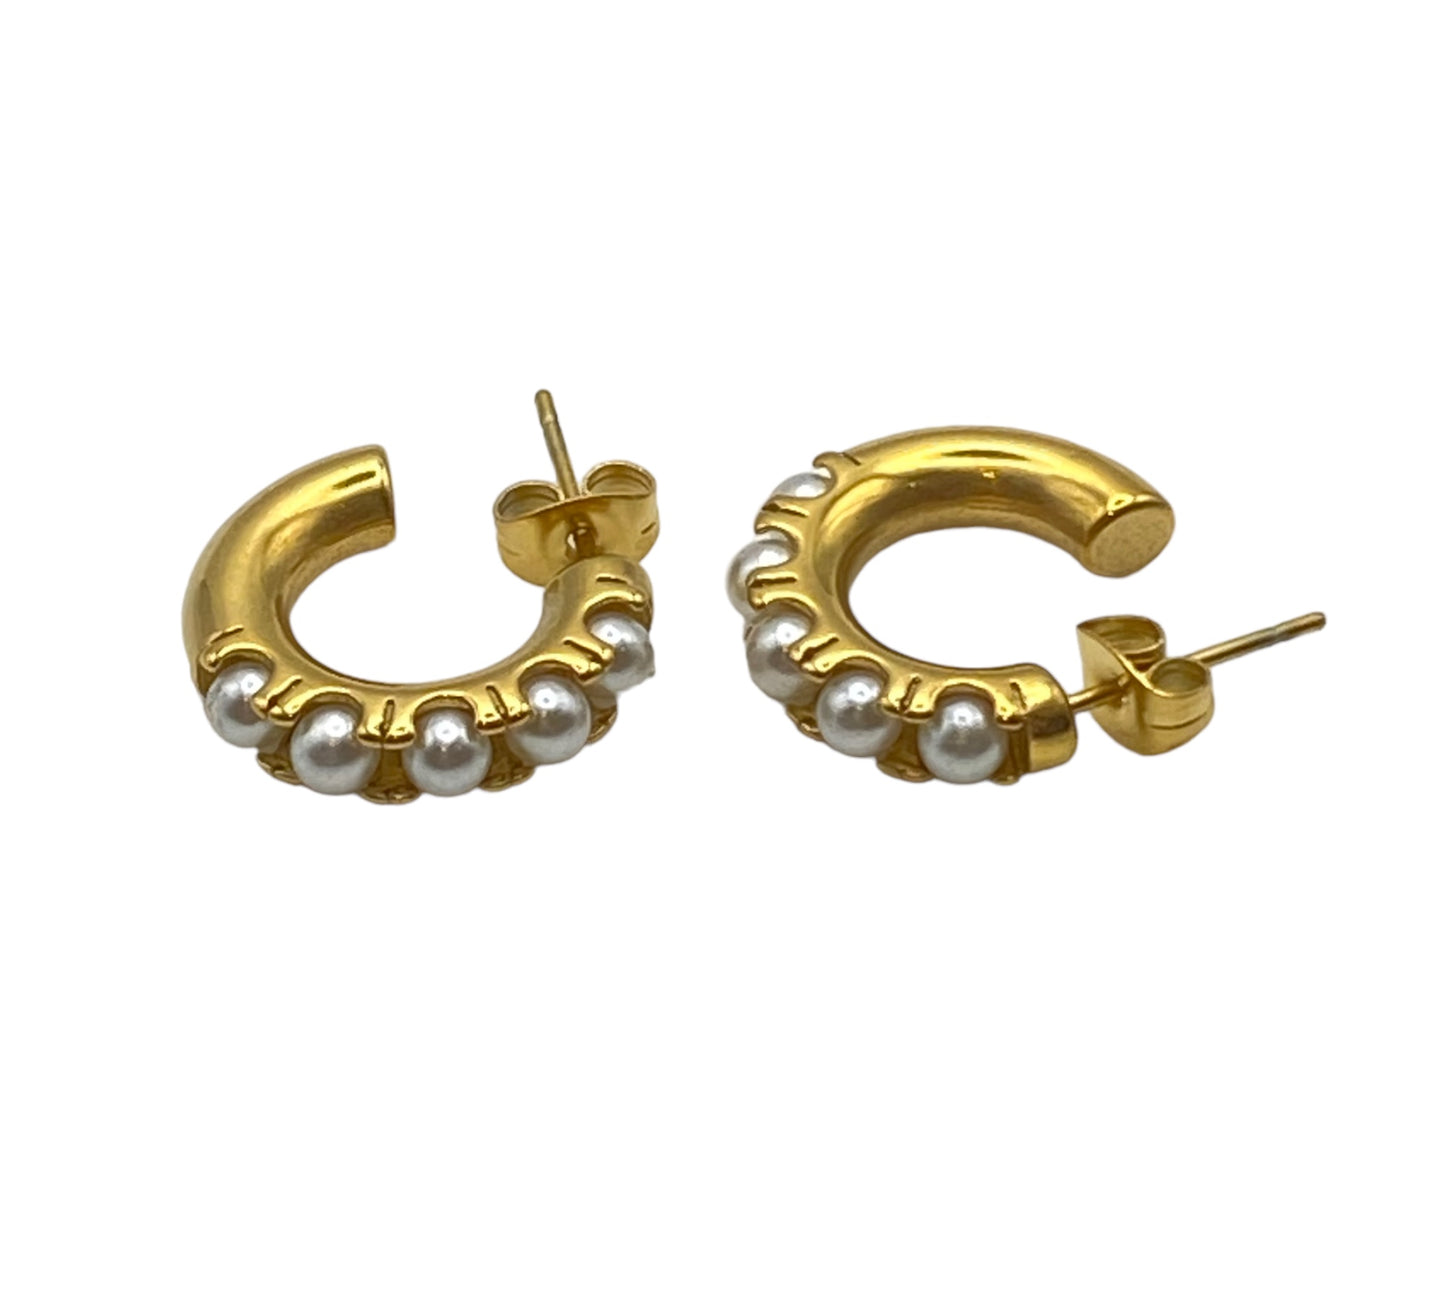 "EMBRACE" gold plated half hoop earrings with pearls